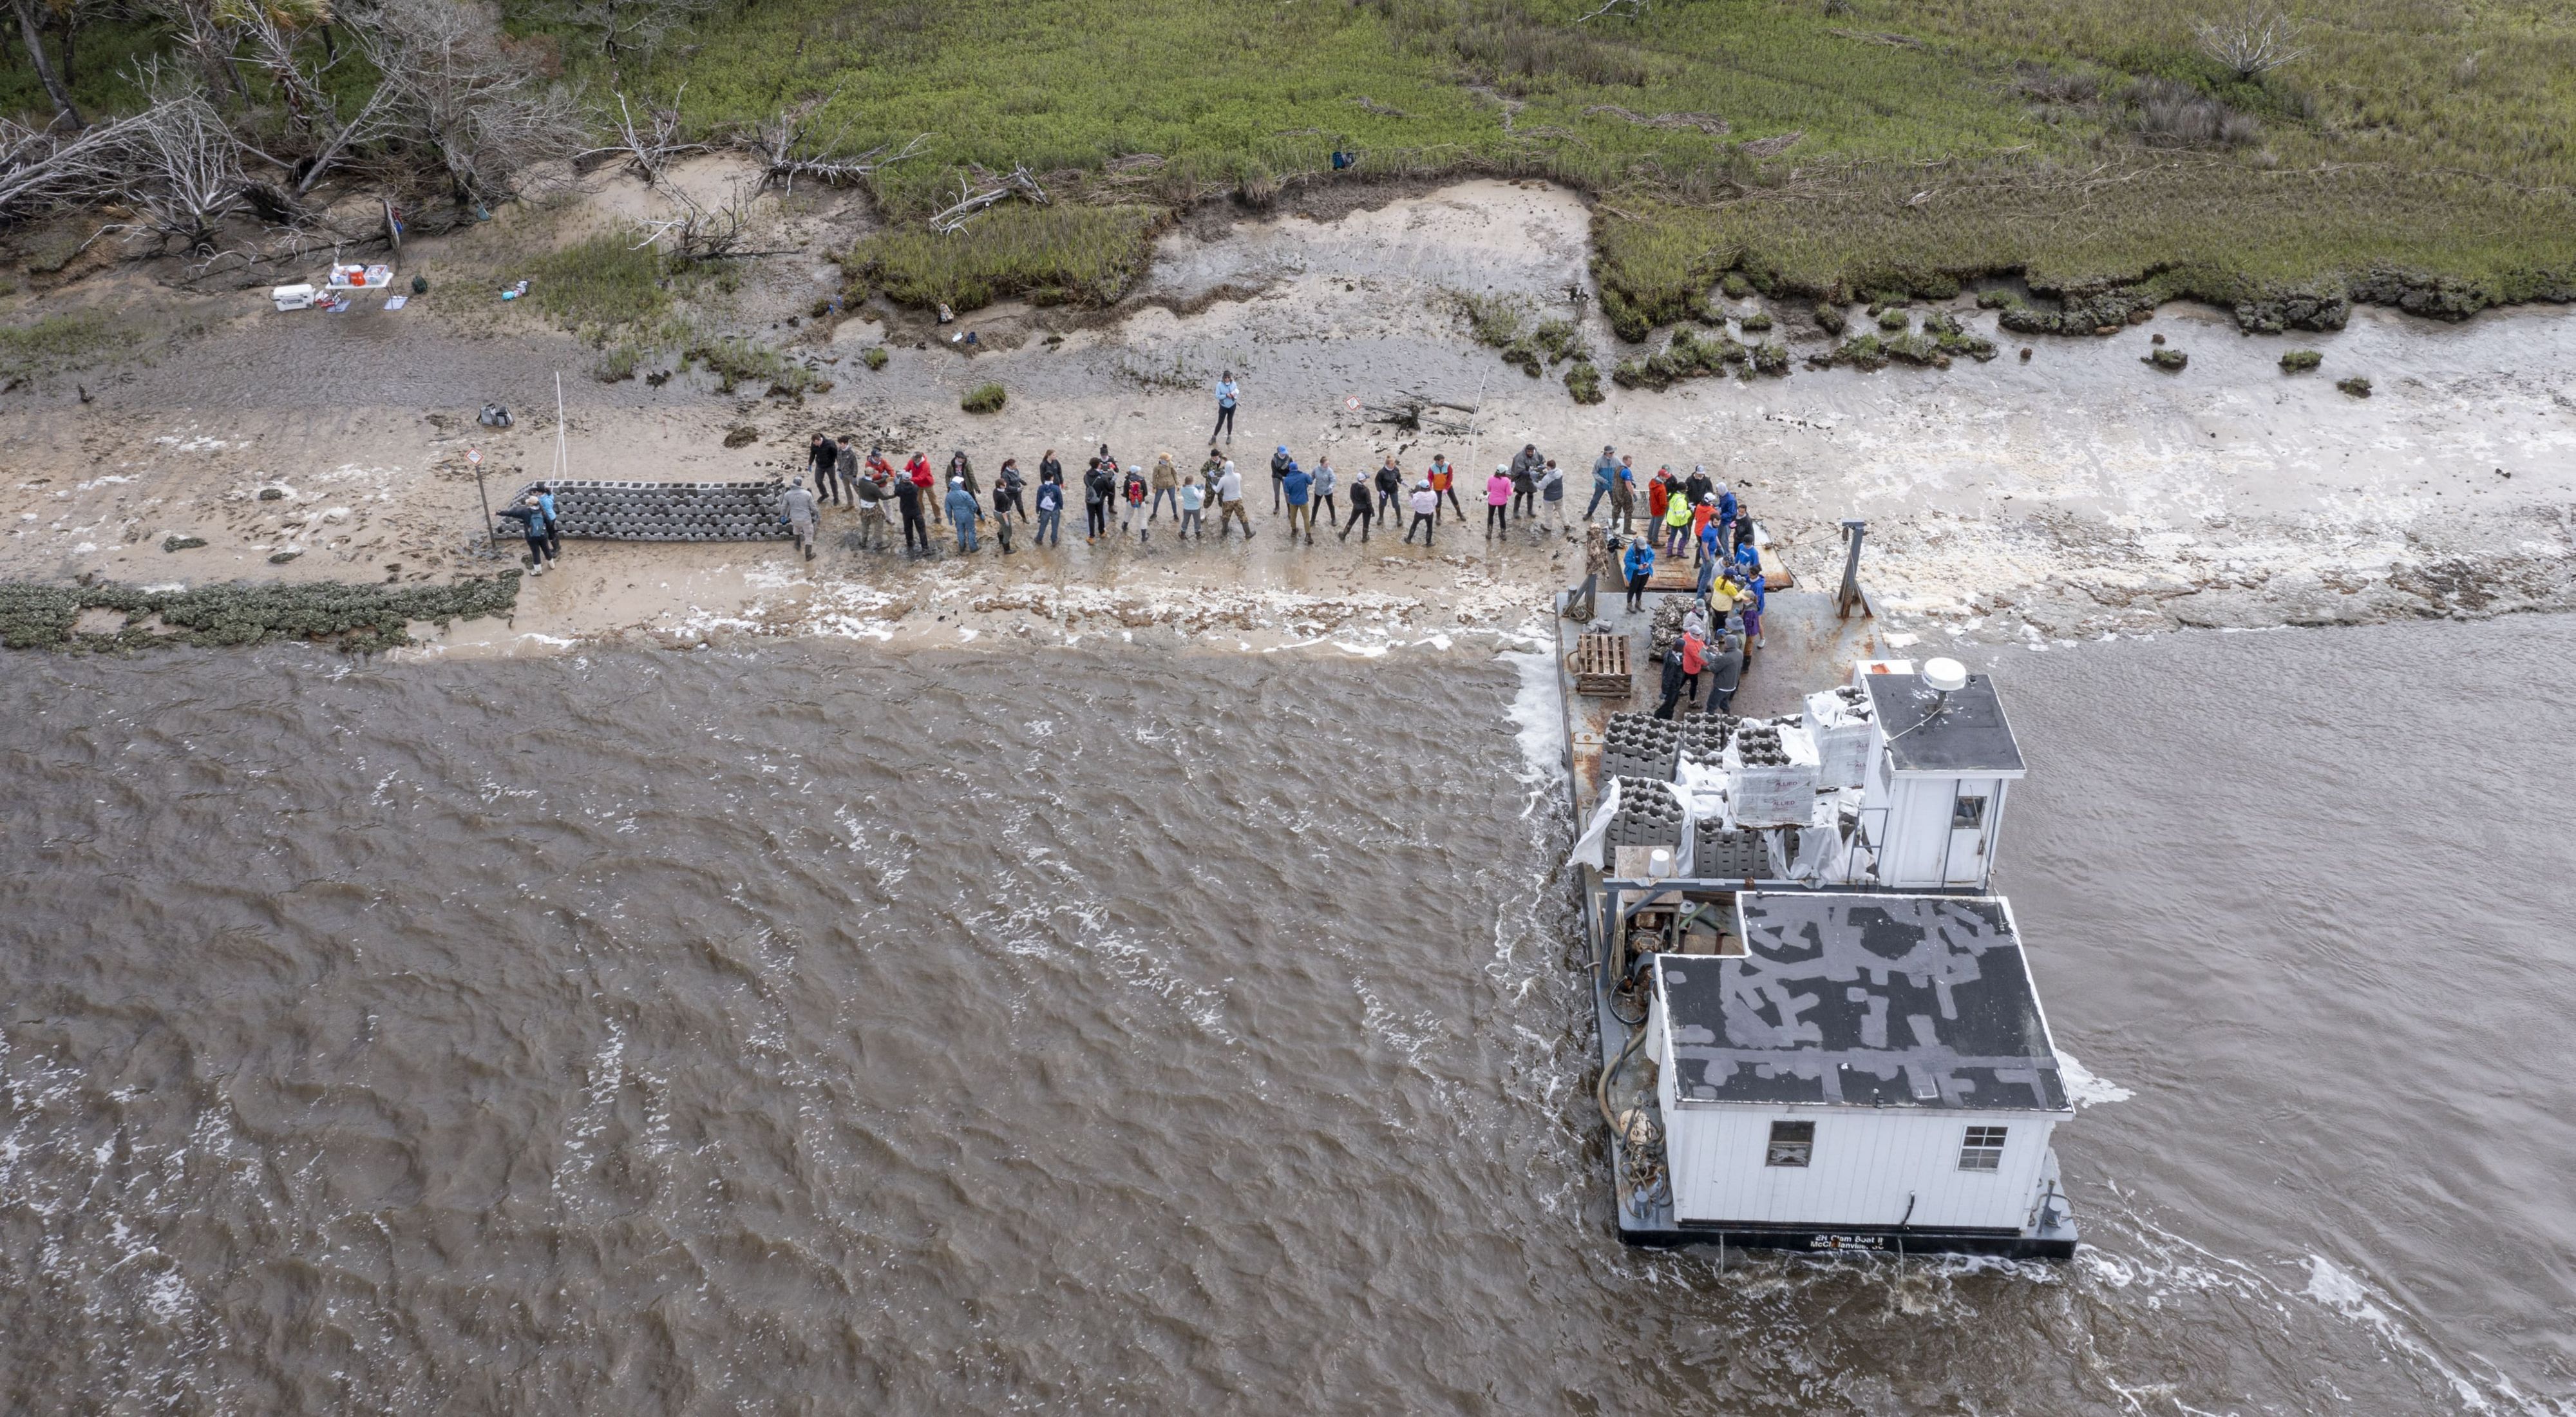 An aerial view of several people standing along a shoreline in front of a white barge.